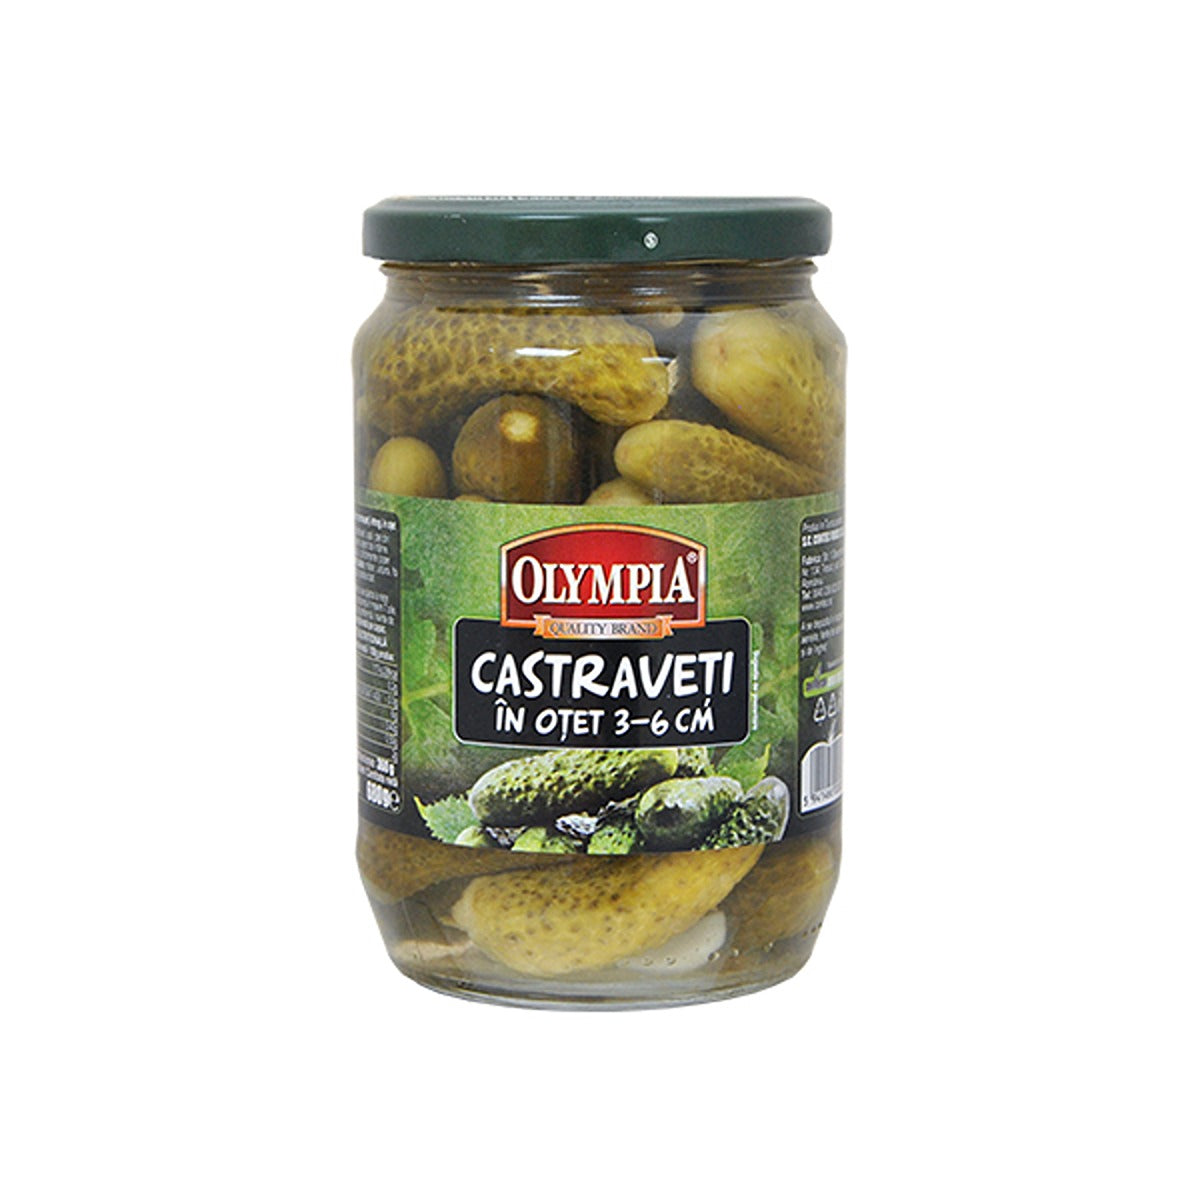 An Olympia jar of pickles on a white background.